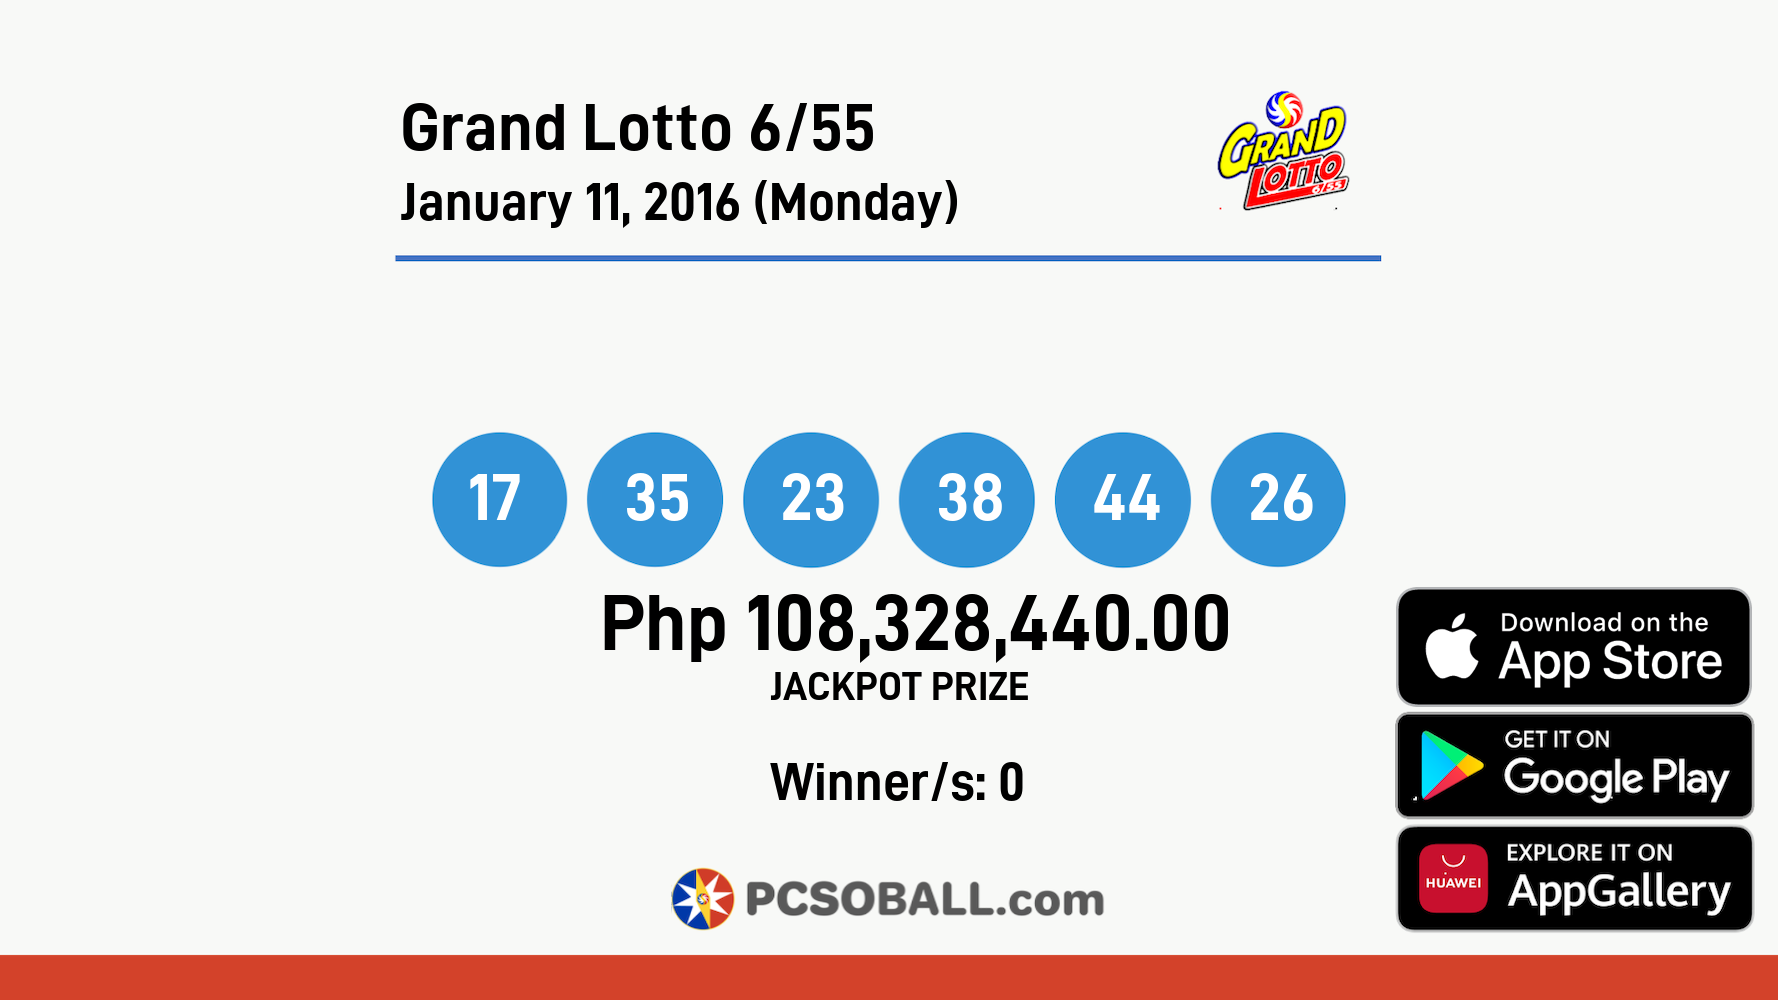 Grand Lotto 6/55 January 11, 2016 (Monday) Result